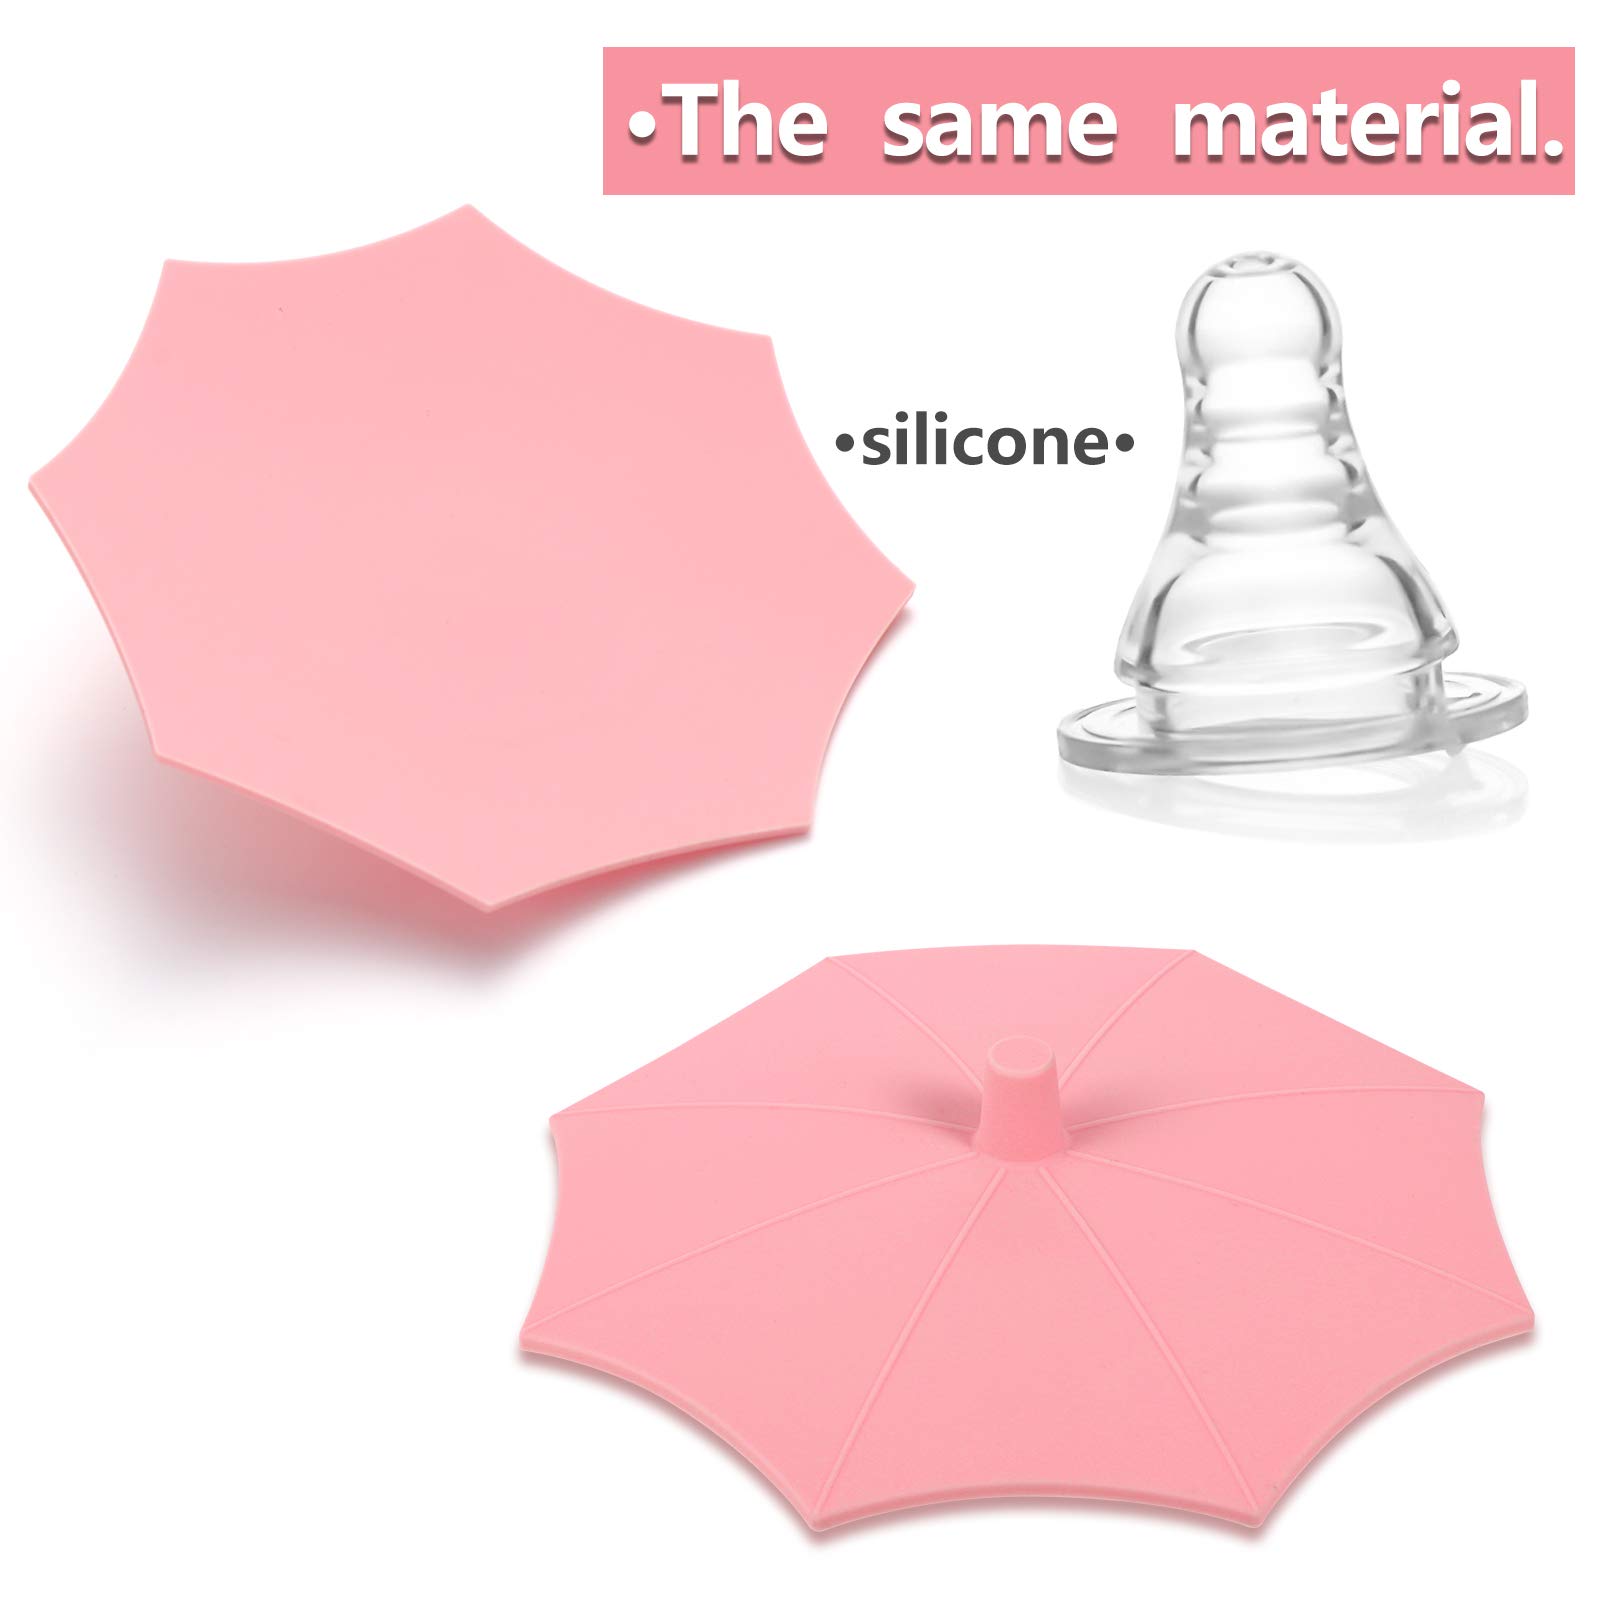 NEW Silicone Umbrella Cup Covers 4-Pack(Upgrade oct. 2020),Food Grade Lids Keep Drinks Warm or Cold Longer, Lids for Mugs, Cups, Tea Pots, Flexible Mug Covers, Cup Lids for Coffee & Tea.(Mix Colour)